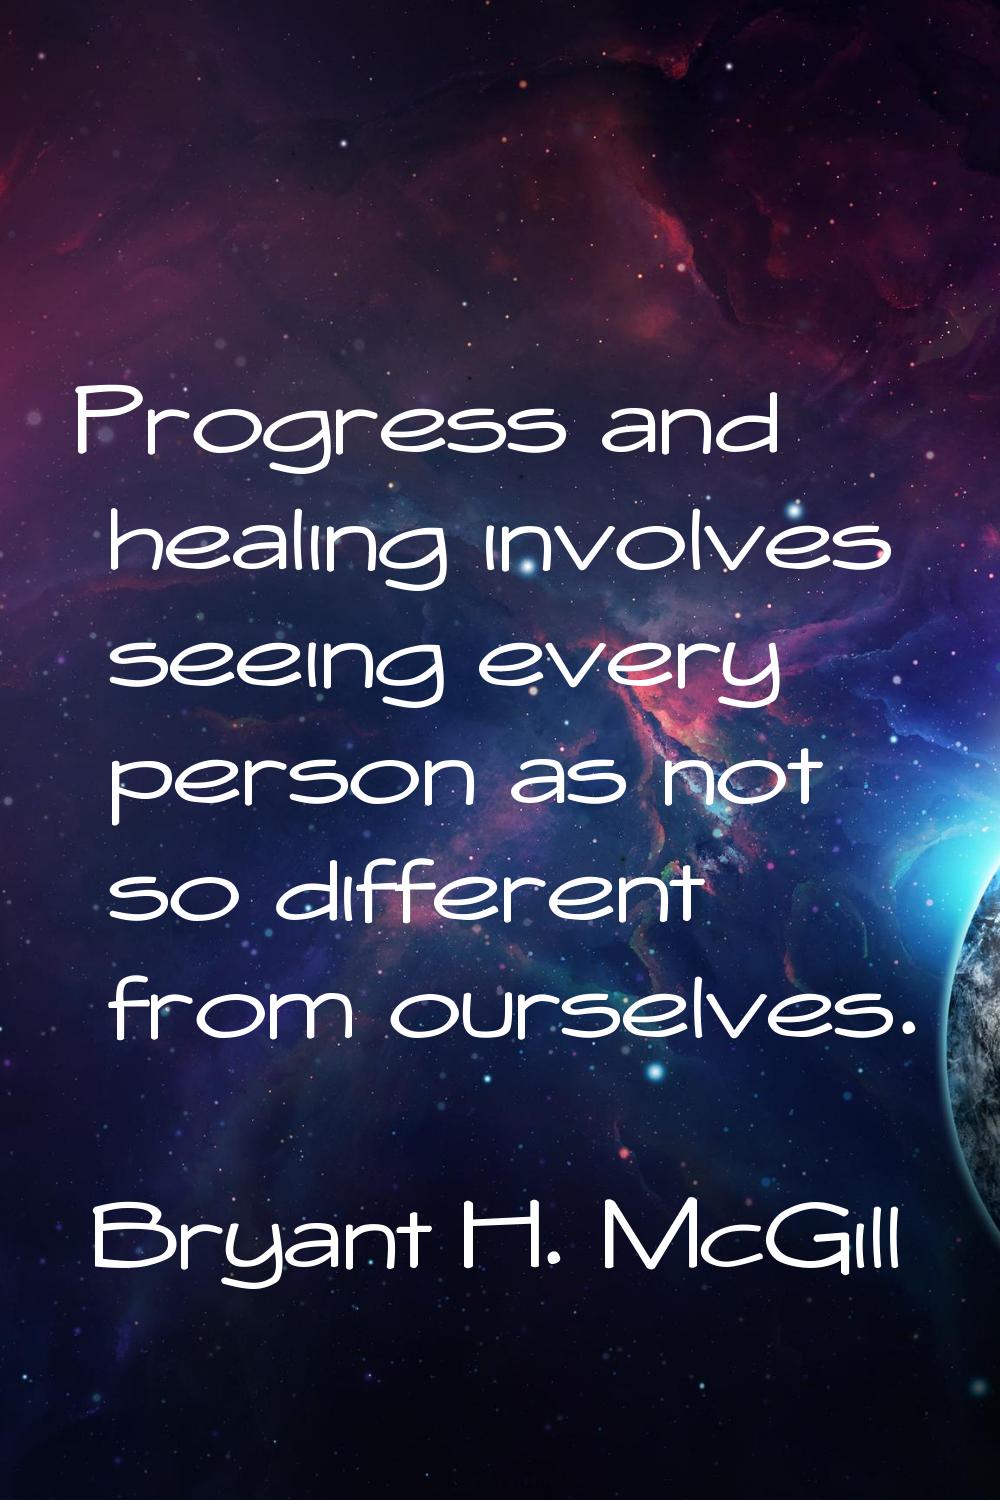 Progress and healing involves seeing every person as not so different from ourselves.